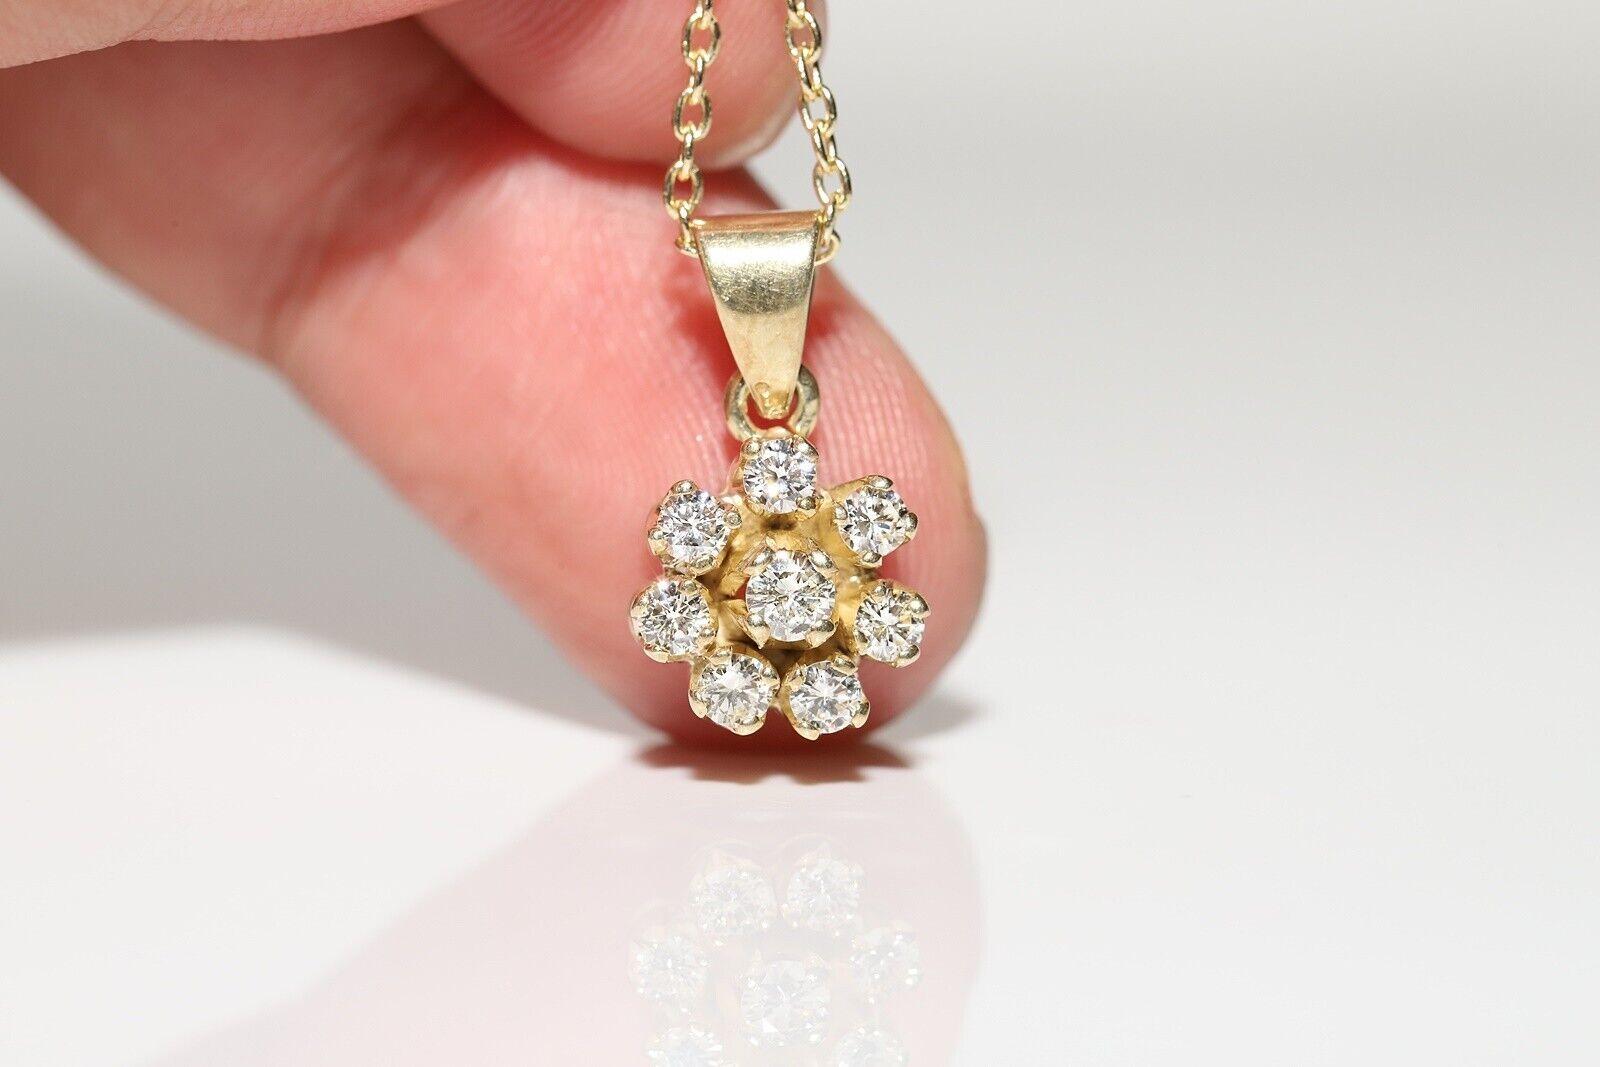 Vintage Circa 1980s 14k Gold Natural Diamond Decorated Pendant Necklace For Sale 7